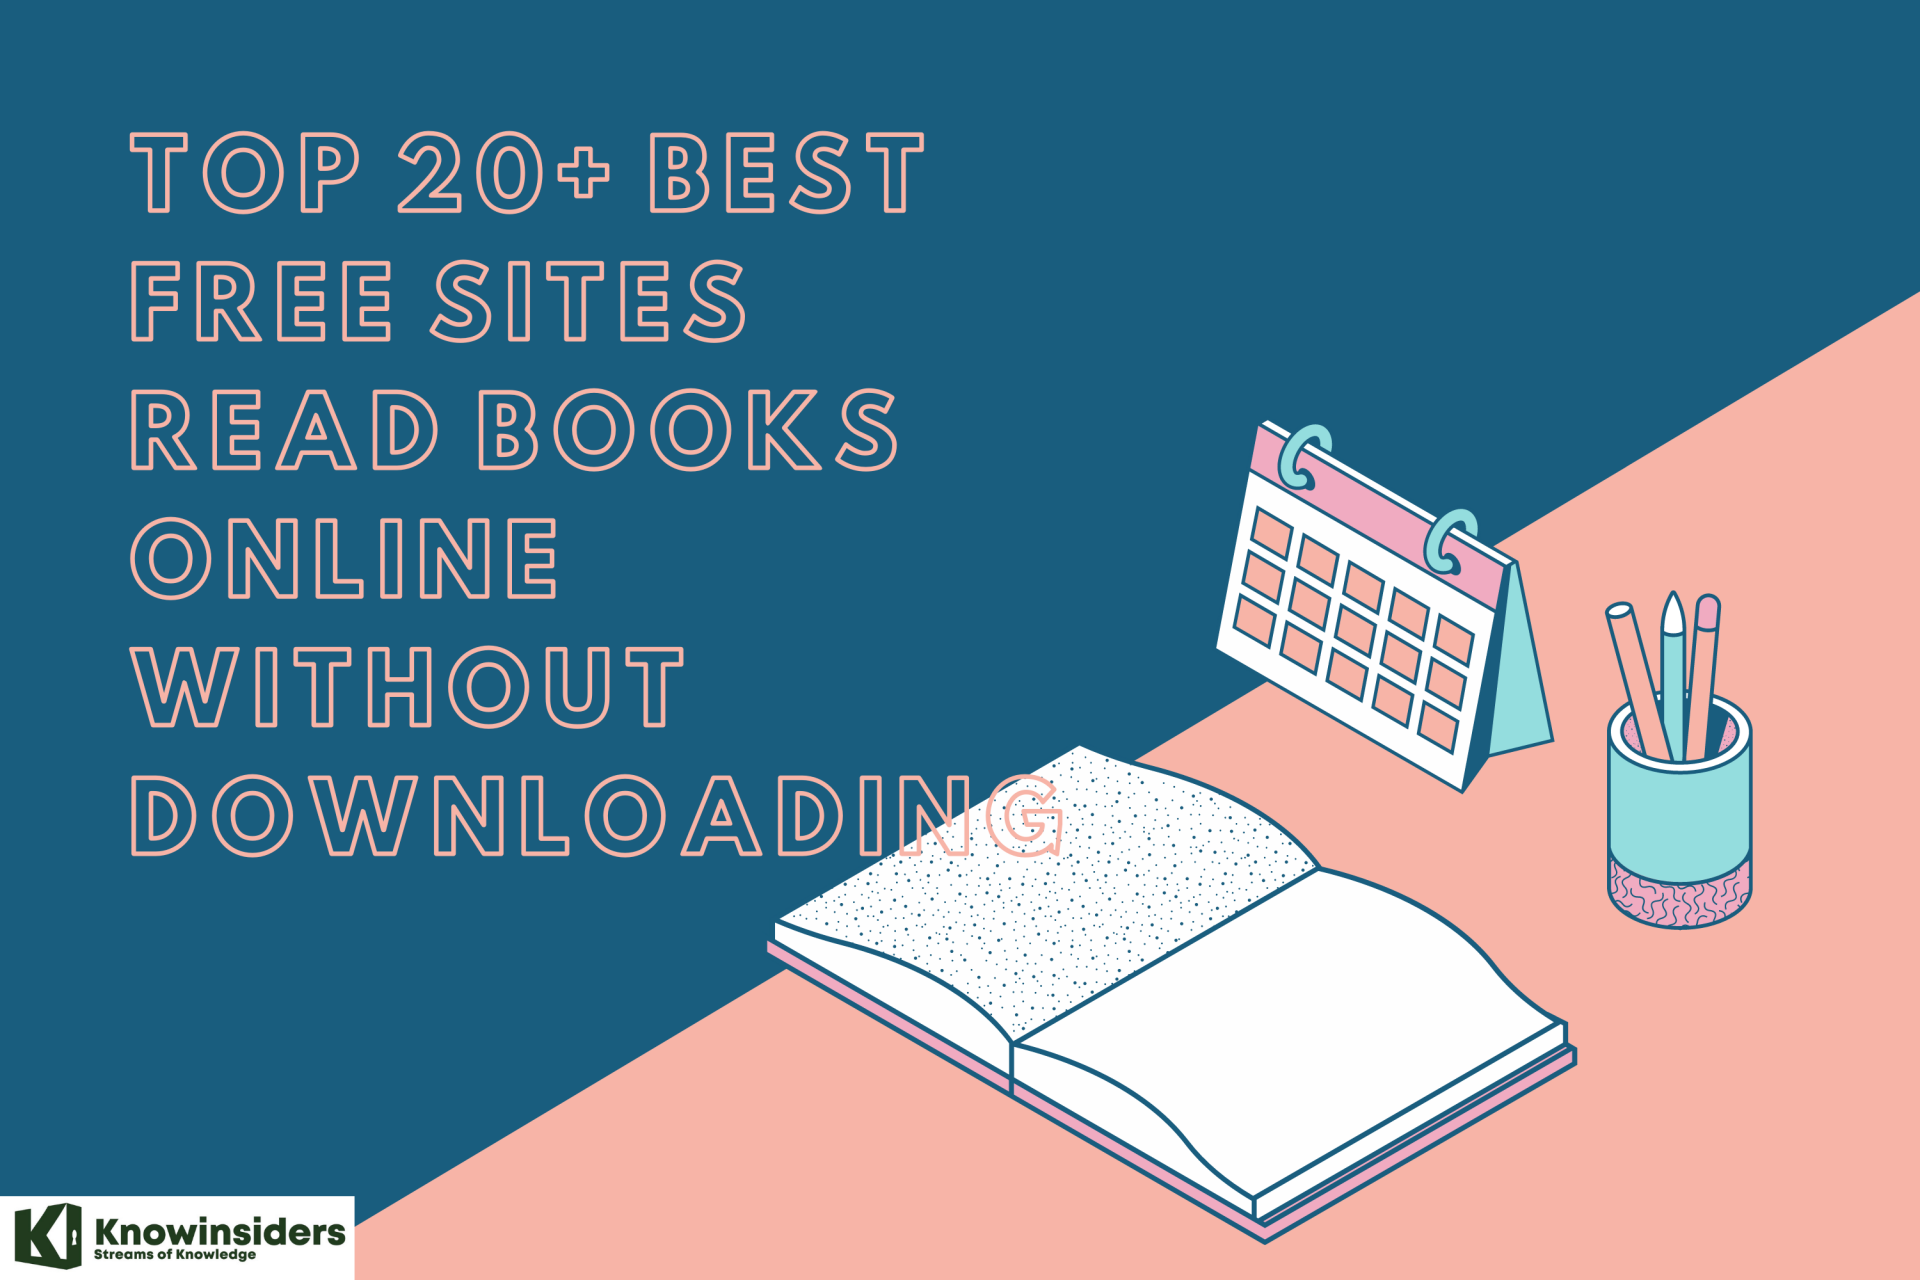 Top 20+ Best Free Sites Read Books Online Without Downloading